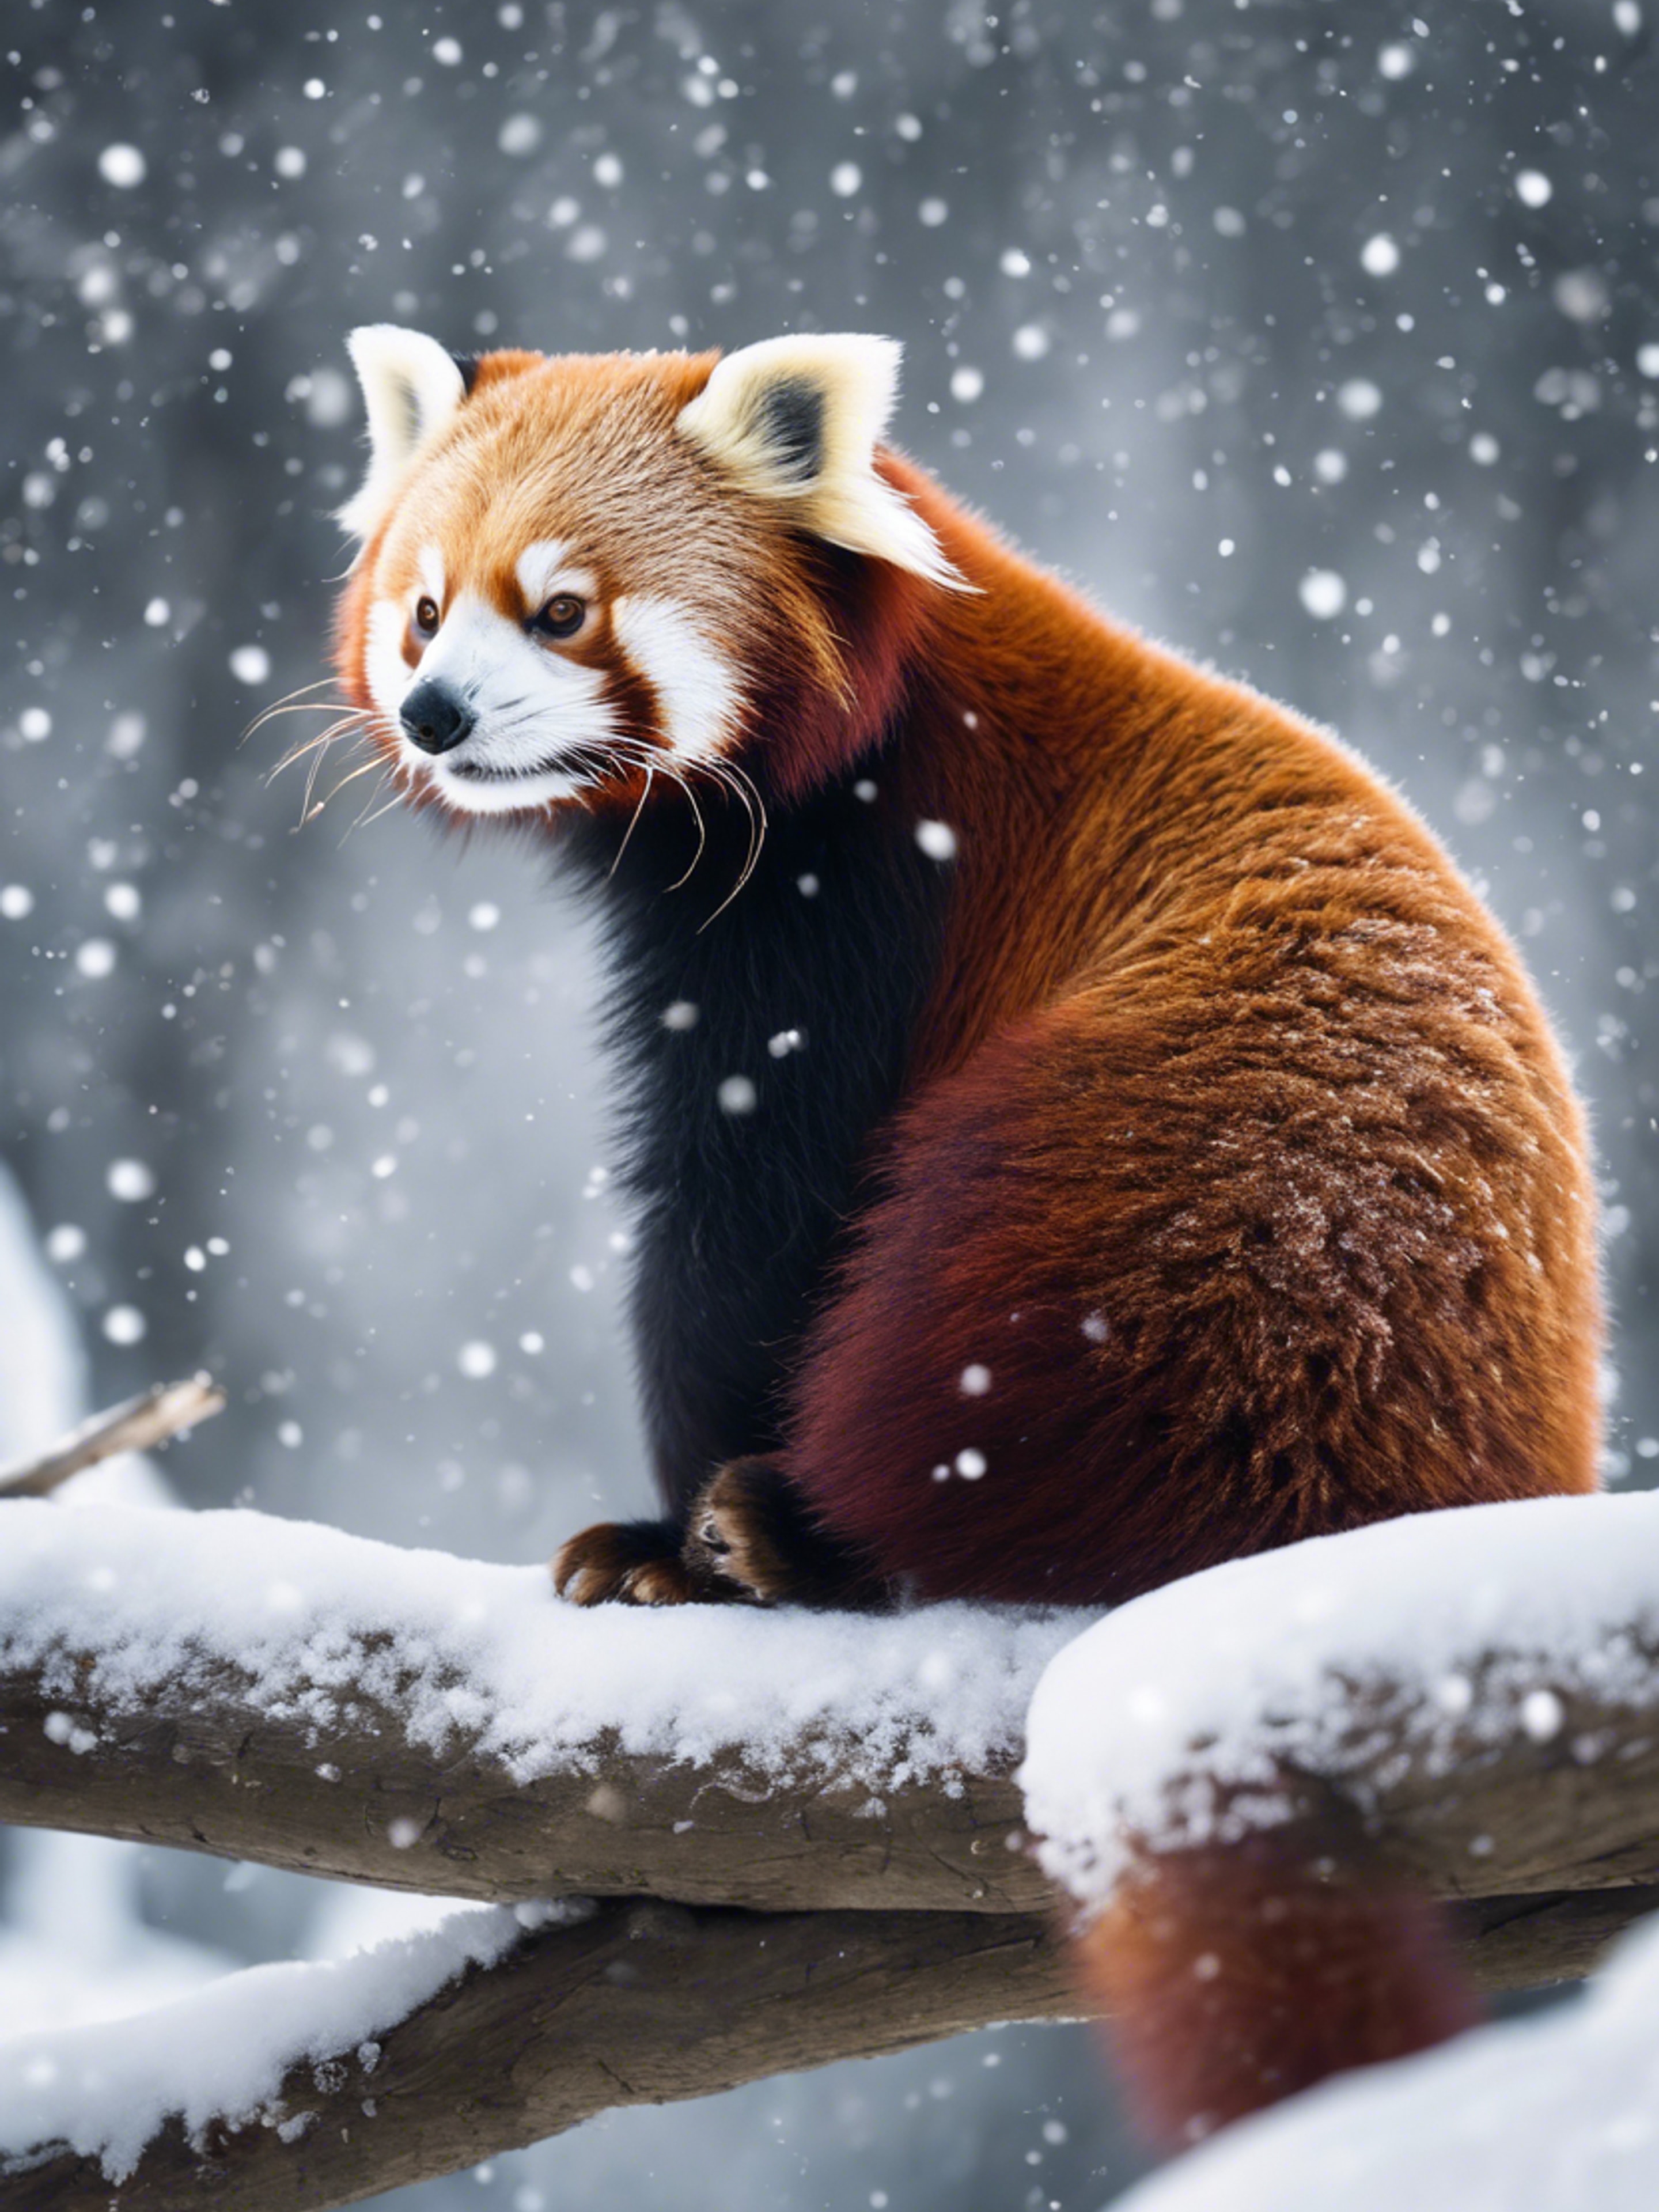 A red panda in winter, its fur looking extra striking against the snow. Tapeta[00977545189243e2b3f0]